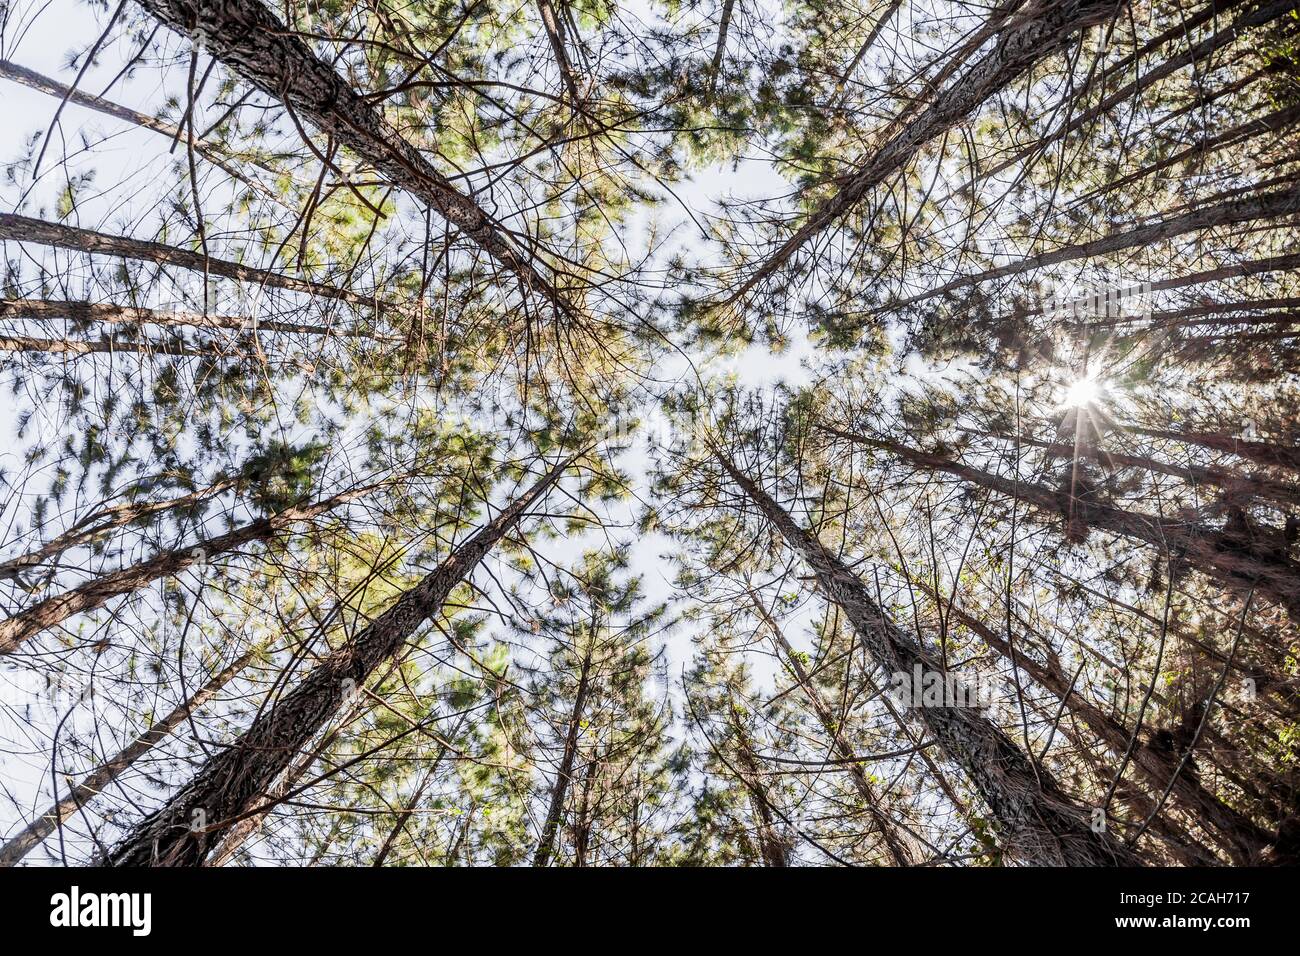 Looking up in a pine forest Stock Photo